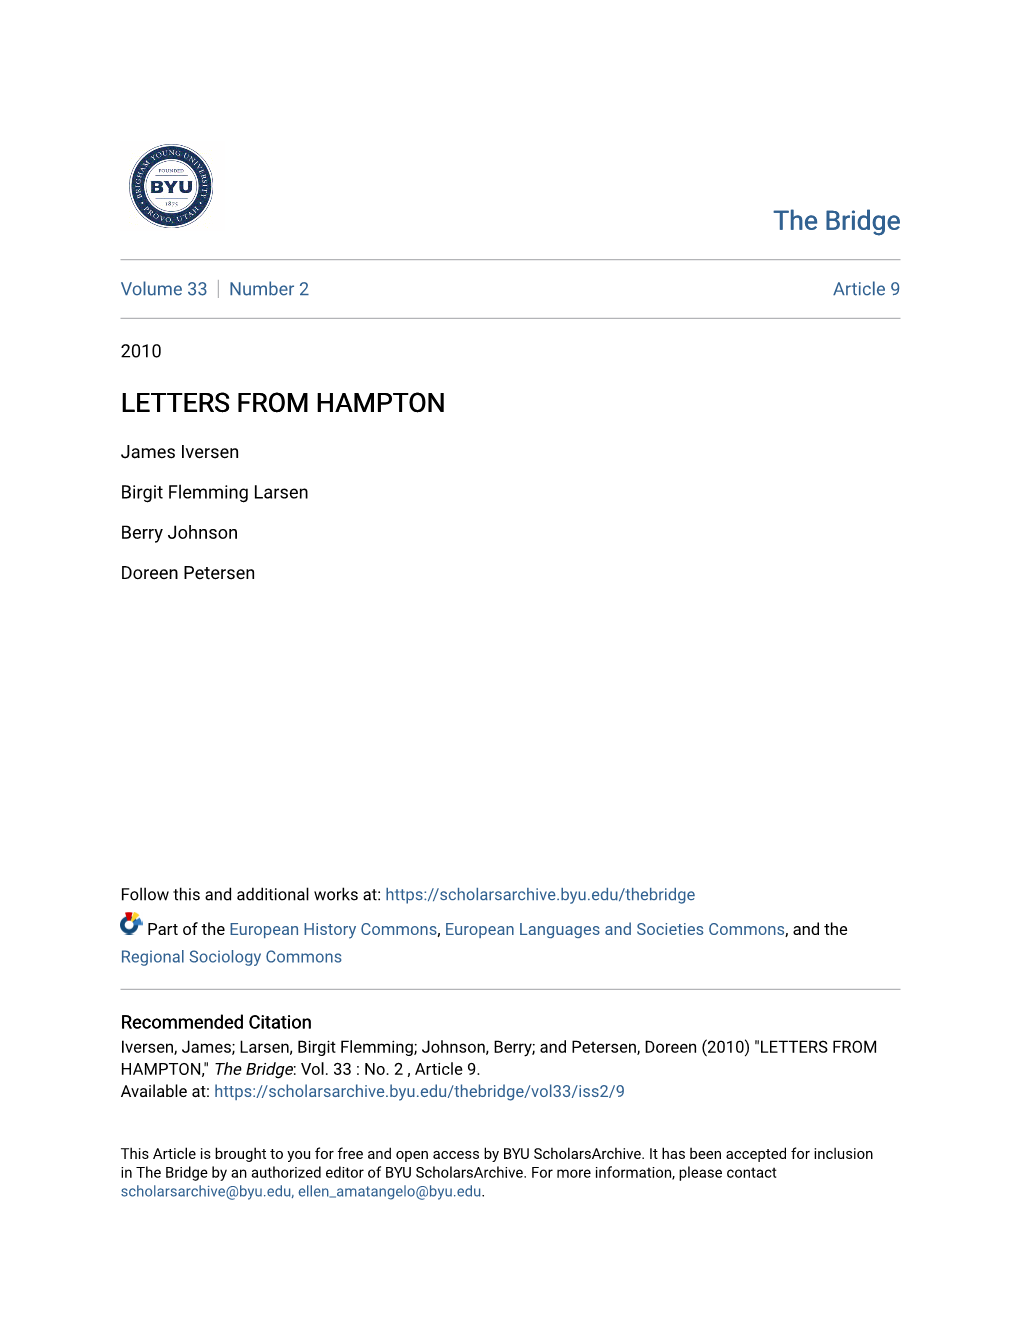 Letters from Hampton